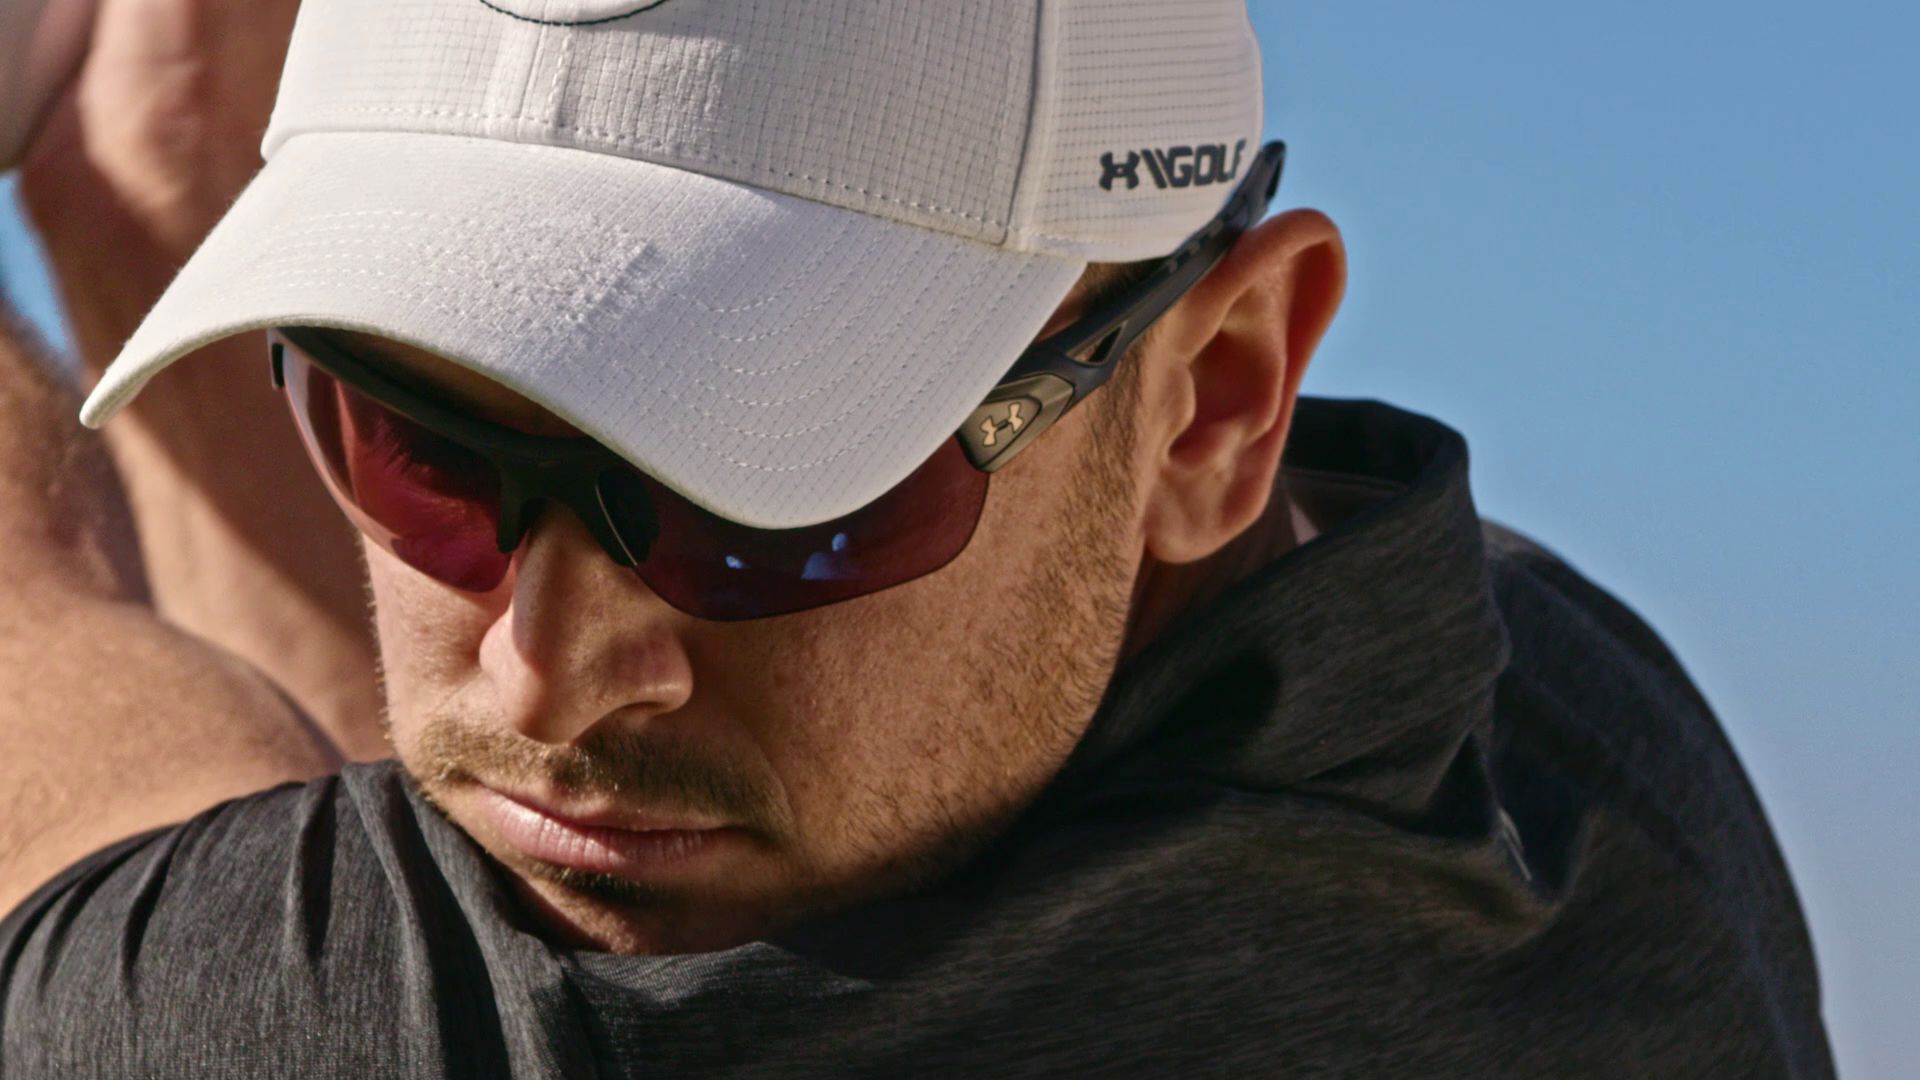 under armour propel replacement lenses